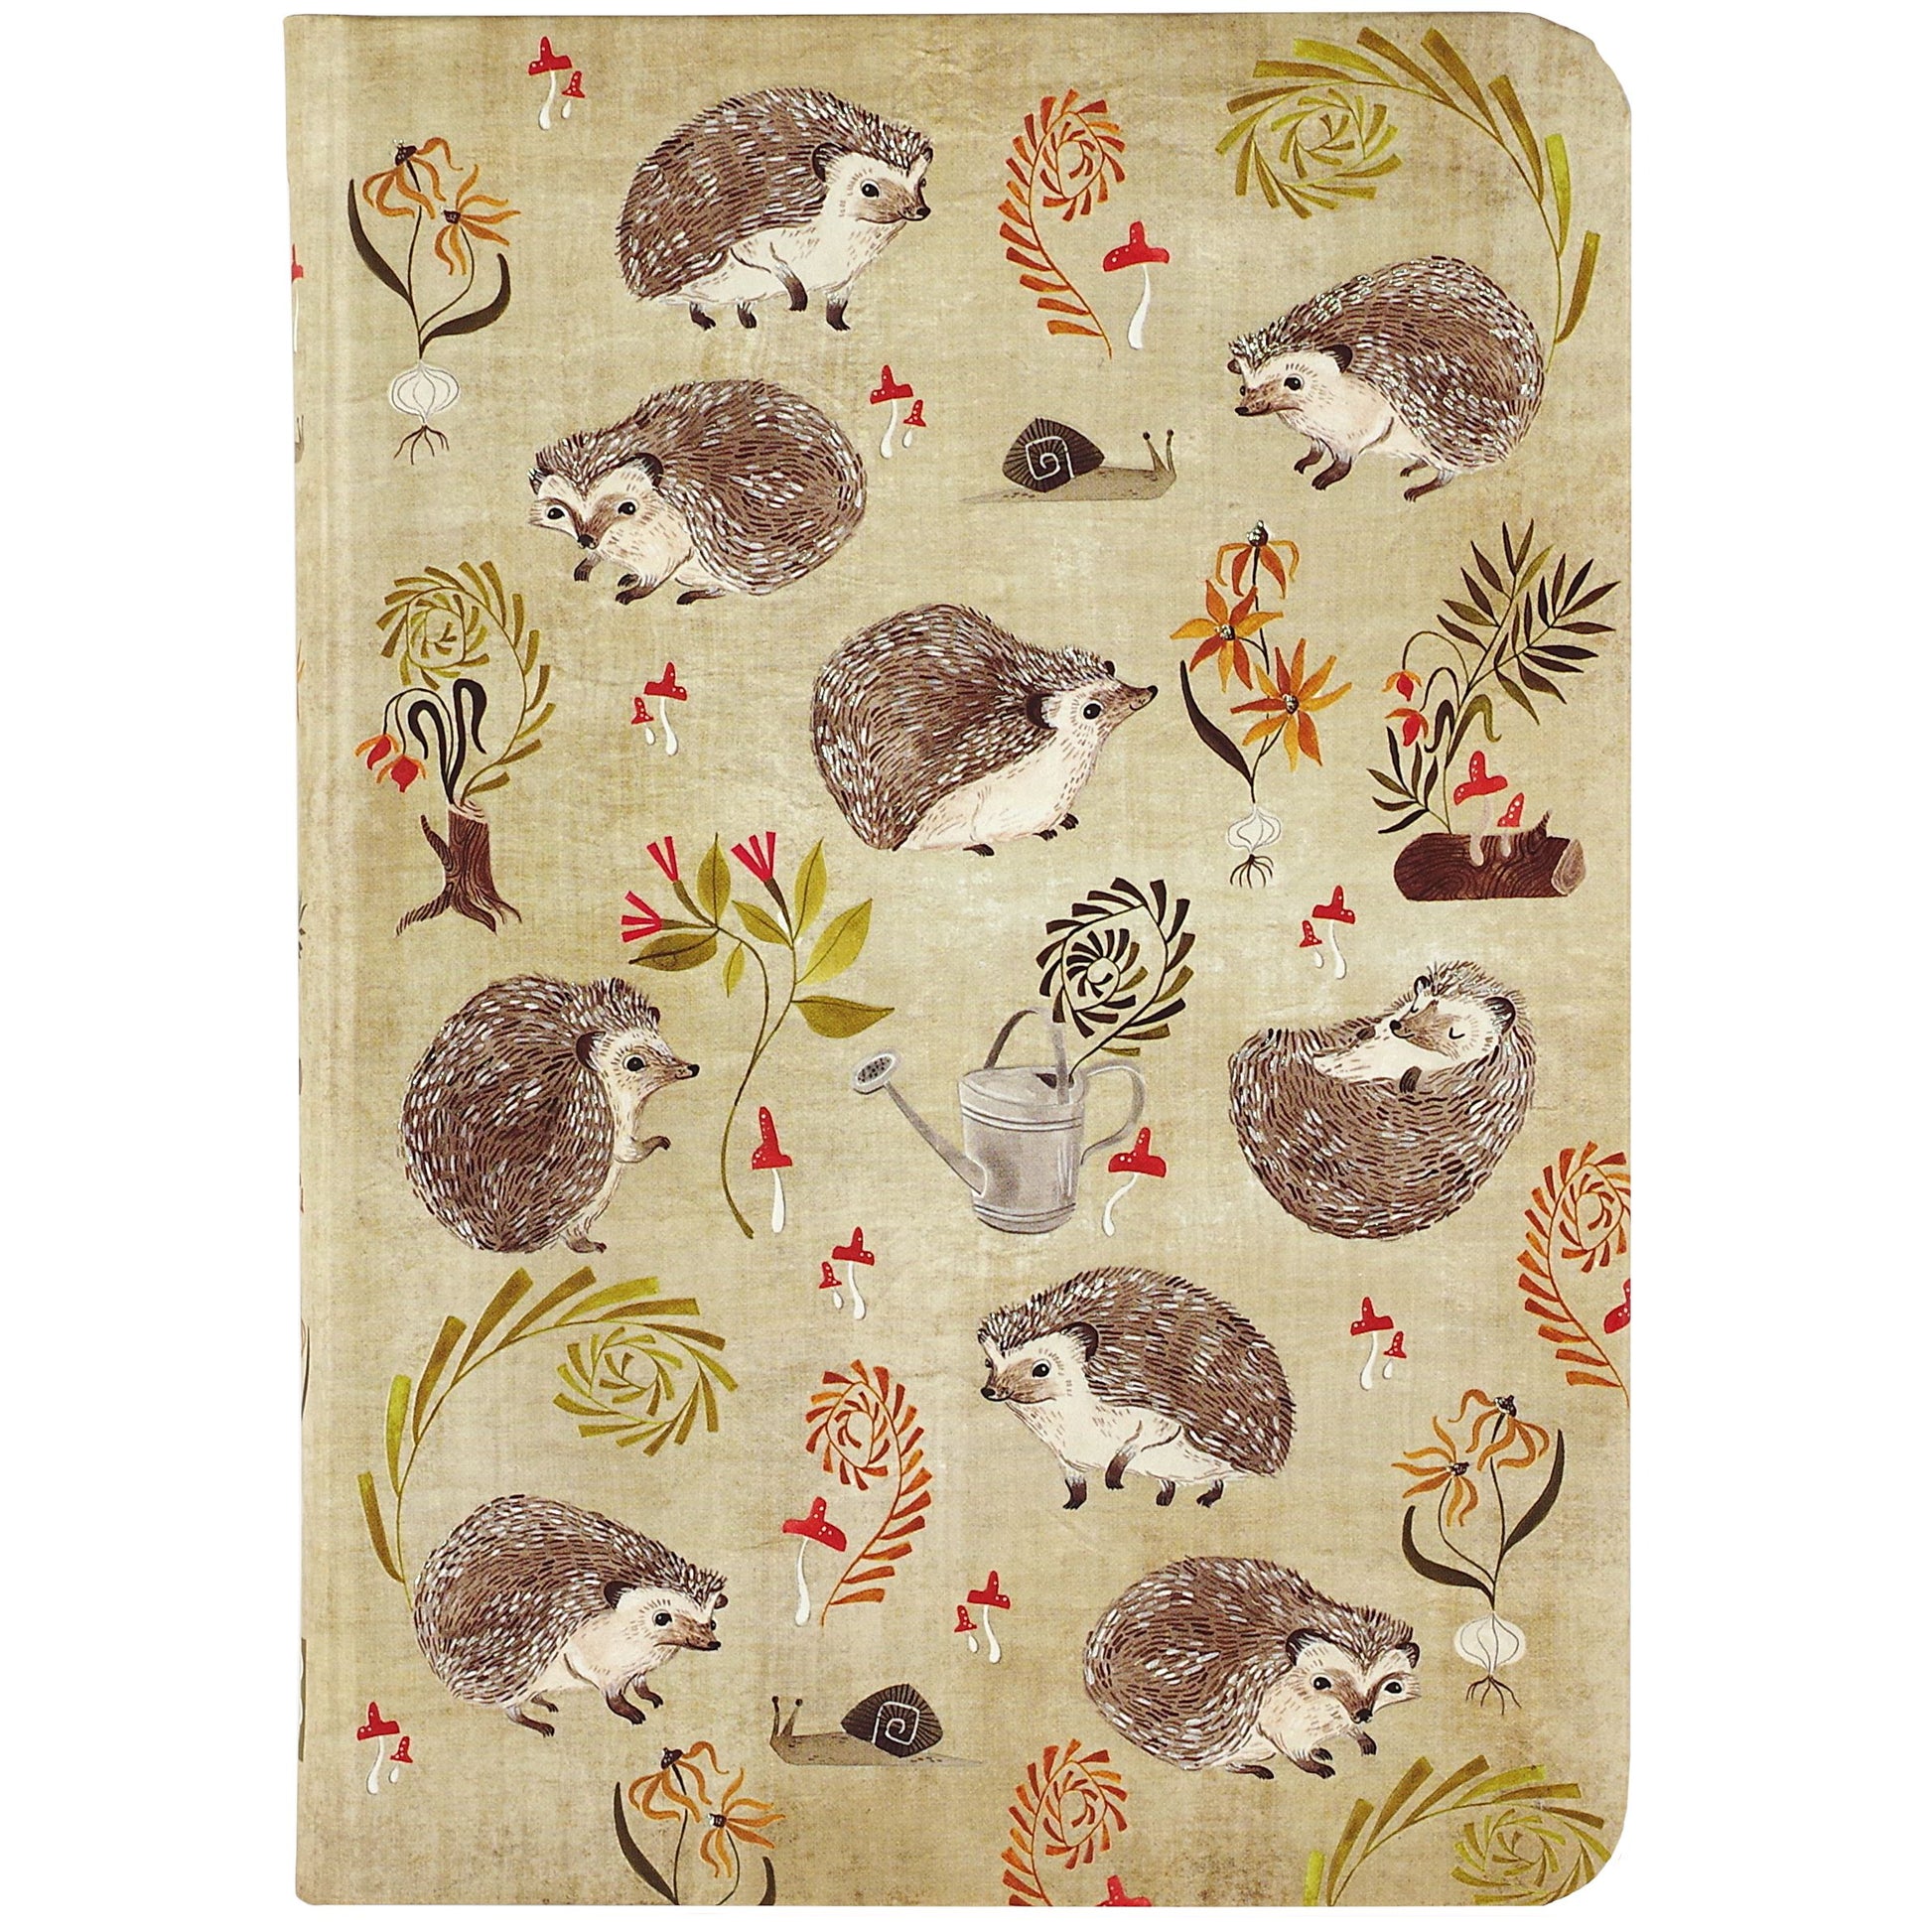 Hedgehogs Journal | Embossed Cover Design | 160 Line Pages Notebook